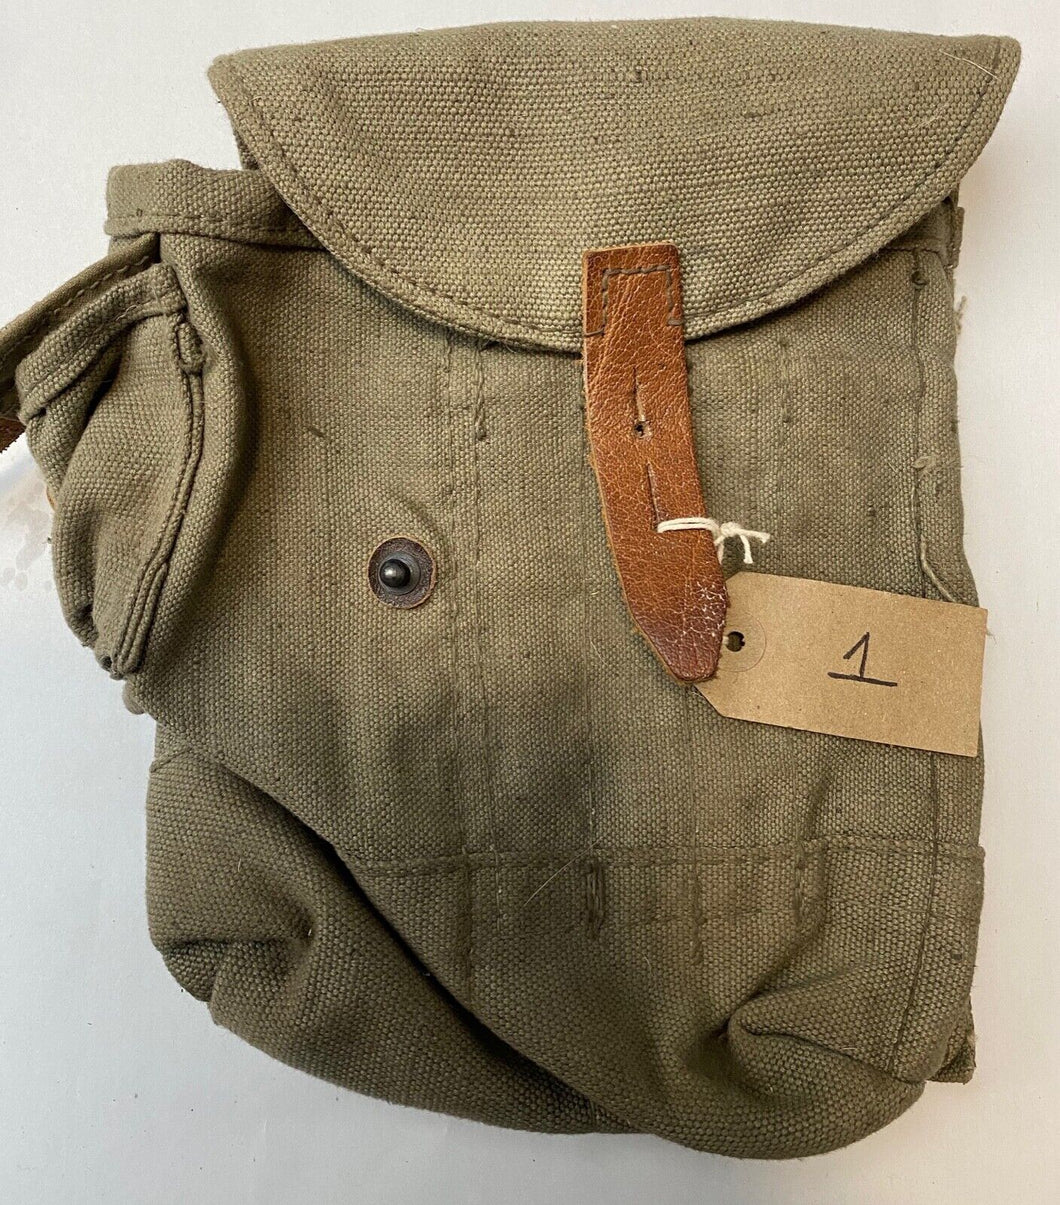 Yugoslavian Army M70 (or similar) canvas & leather pouch in great condition